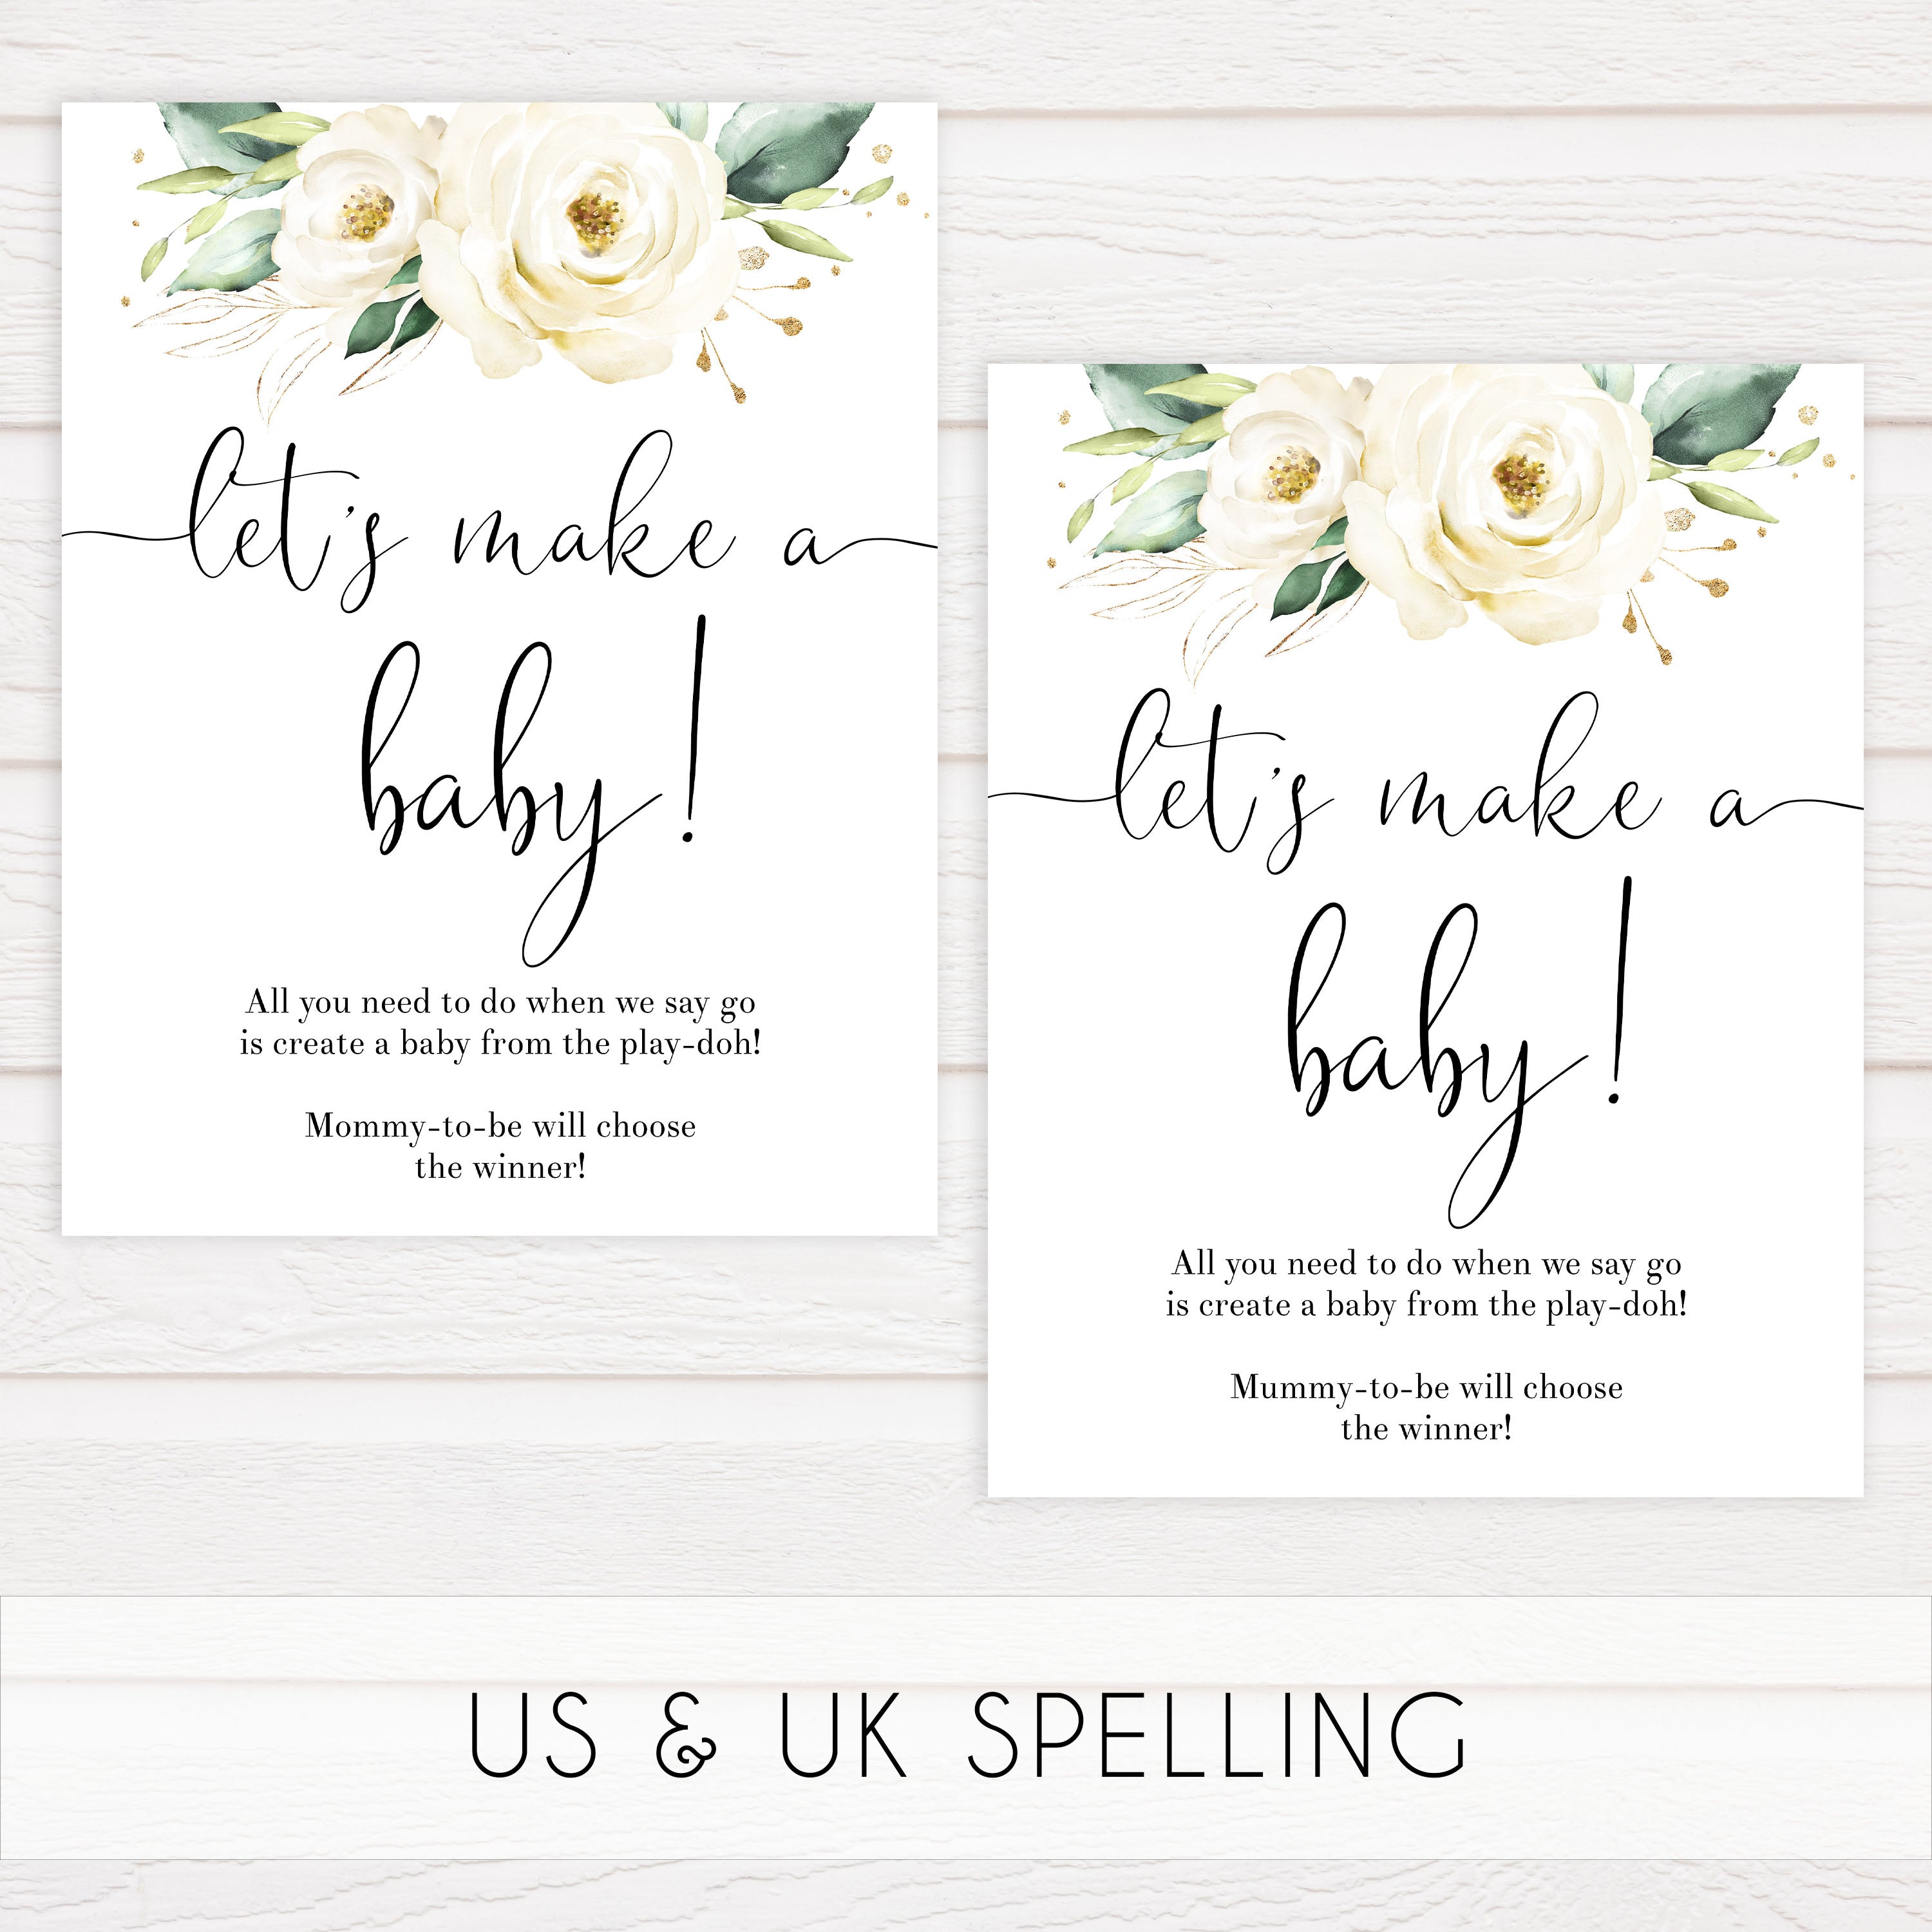 lets make a baby game, Printable baby shower games, shite floral baby games, baby shower games, fun baby shower ideas, top baby shower ideas, floral baby shower, baby shower games, fun floral baby shower ideas